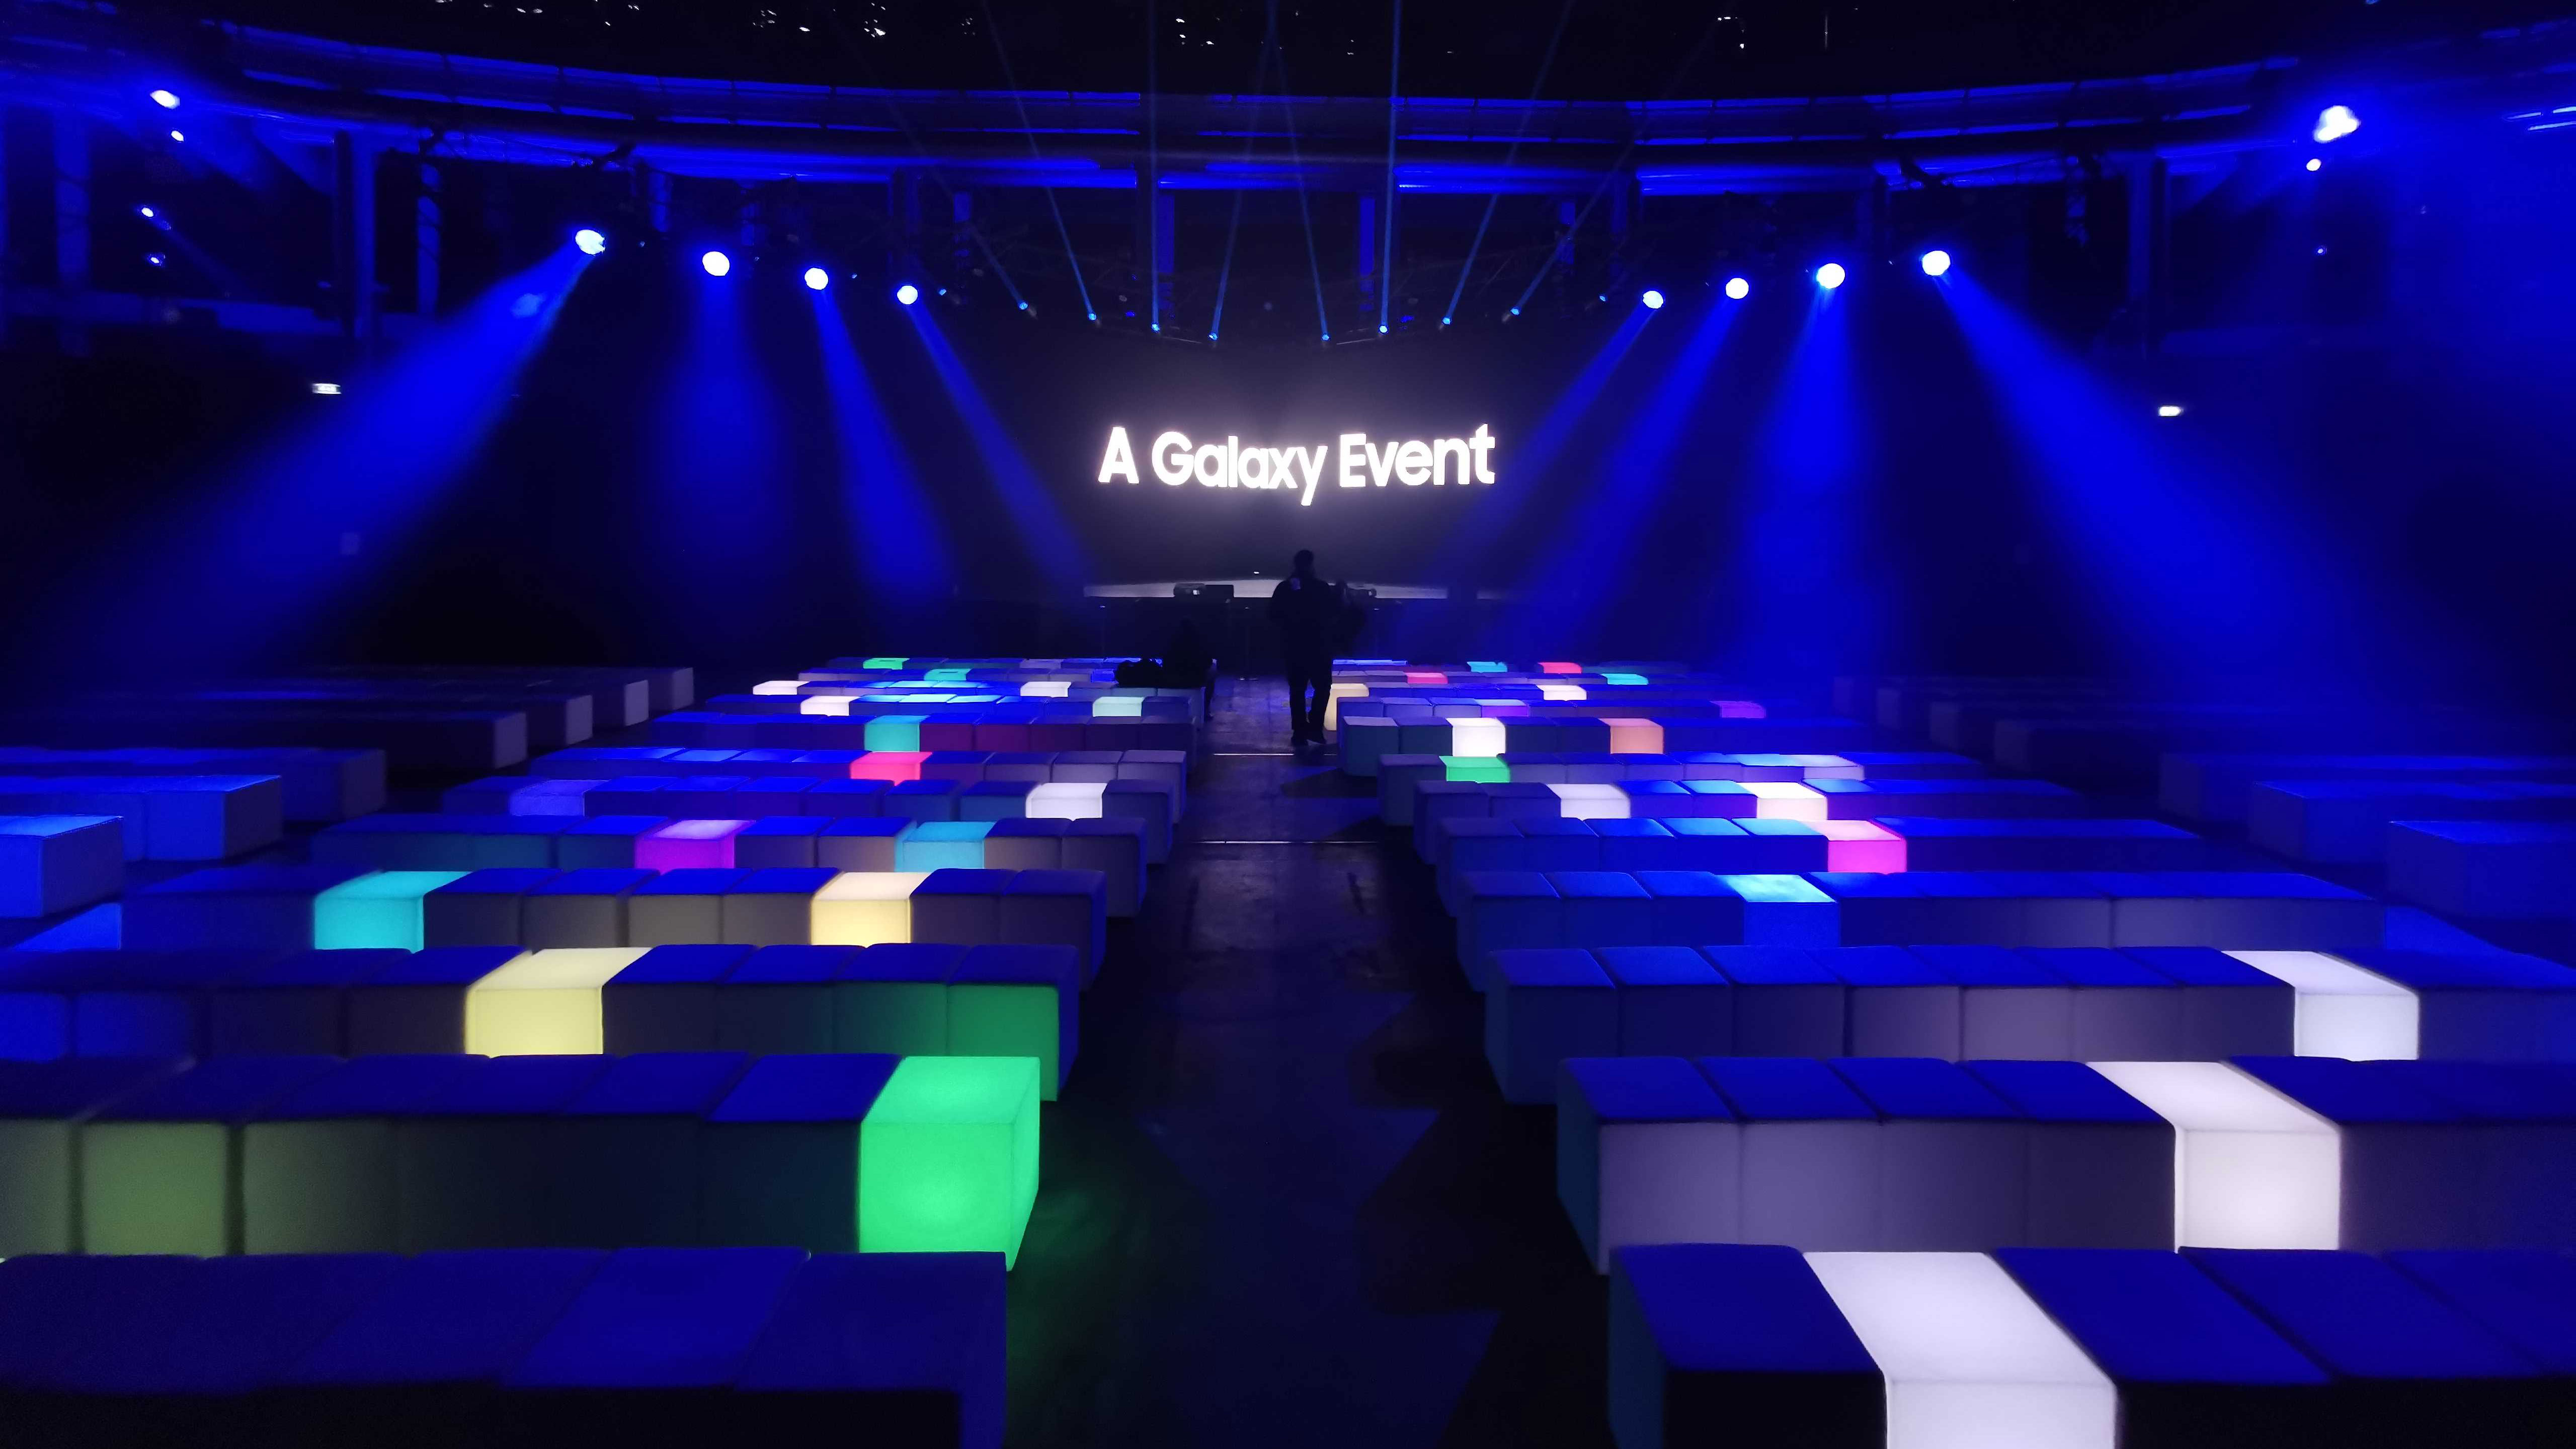 Samsung Galaxy event live blog we're live at the new Galaxy launch